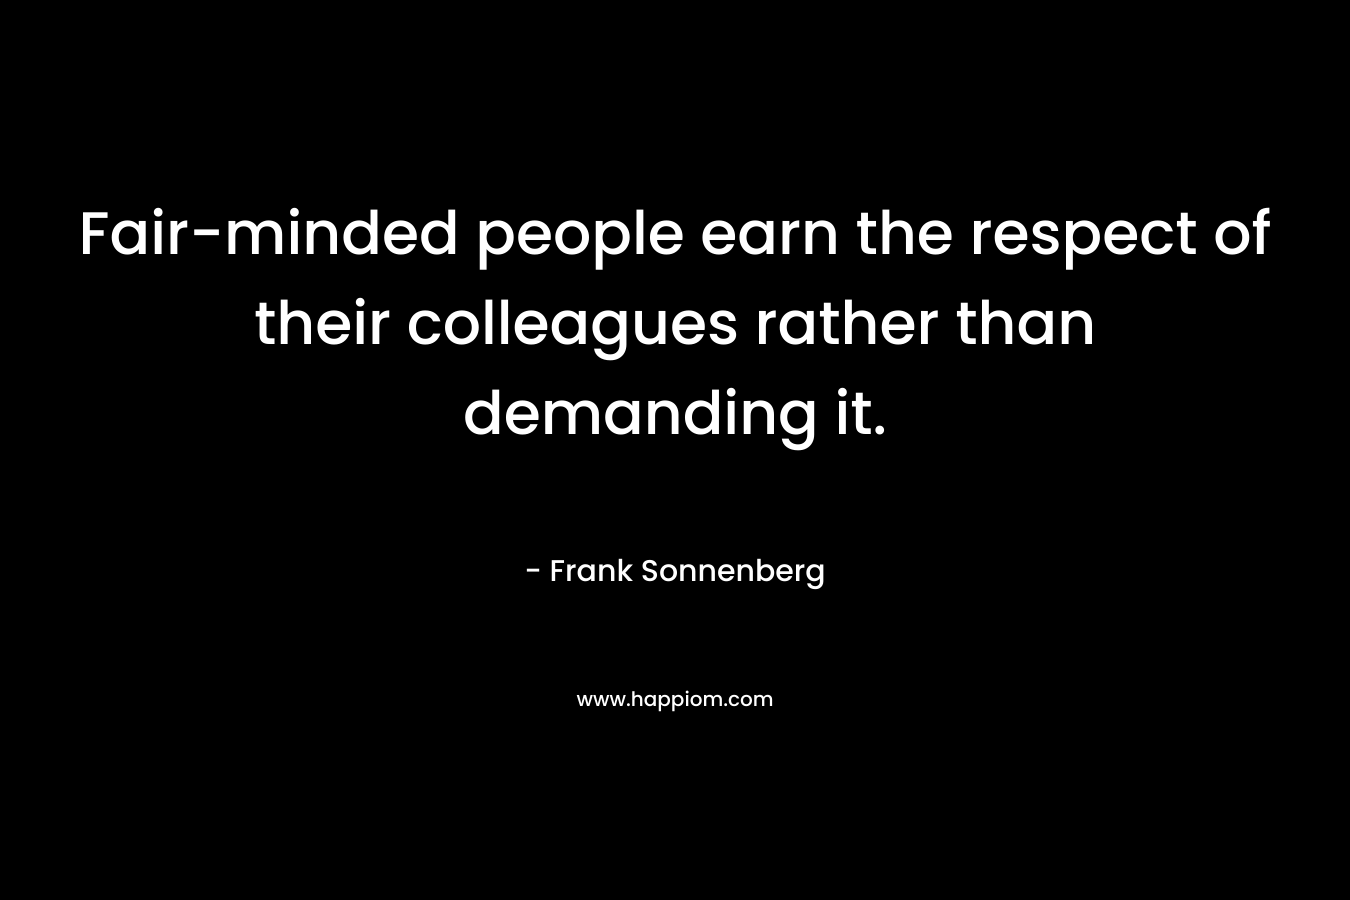 Fair-minded people earn the respect of their colleagues rather than demanding it.